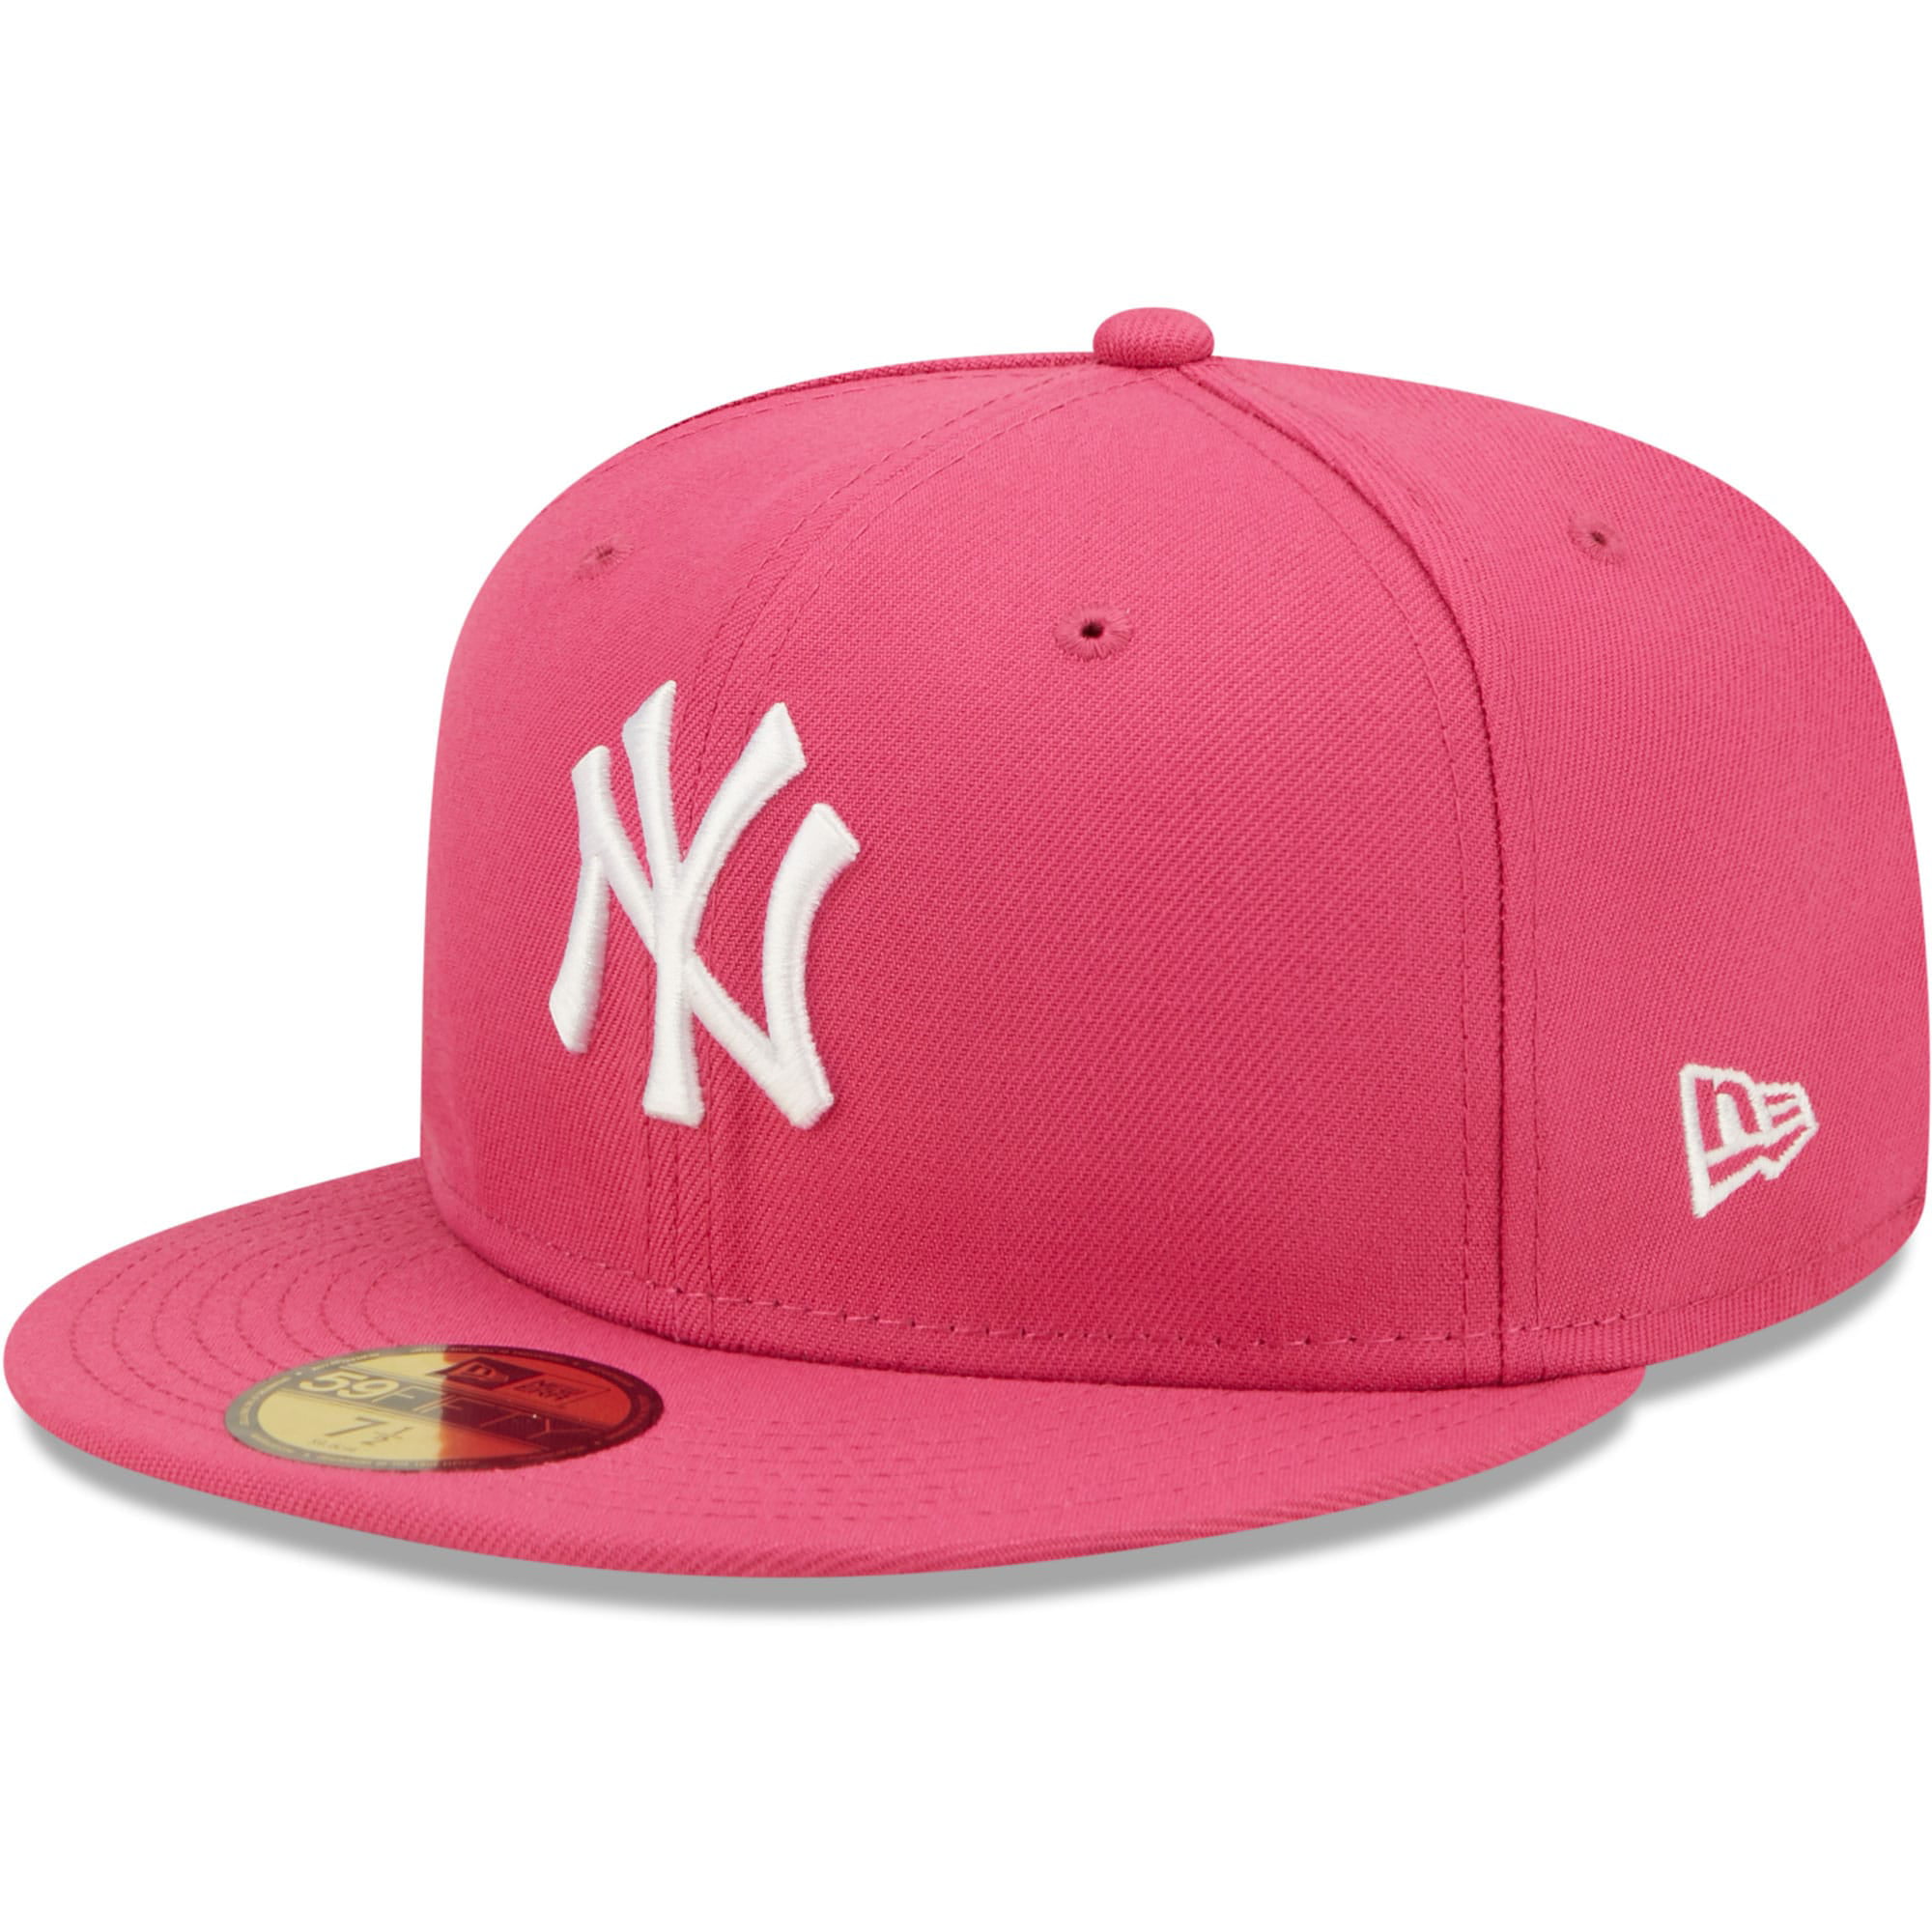 Hat Club Pink Martini MLB September 26 59Fifty Fitted Hat Collection by MLB  x New Era  Strictly Fitteds